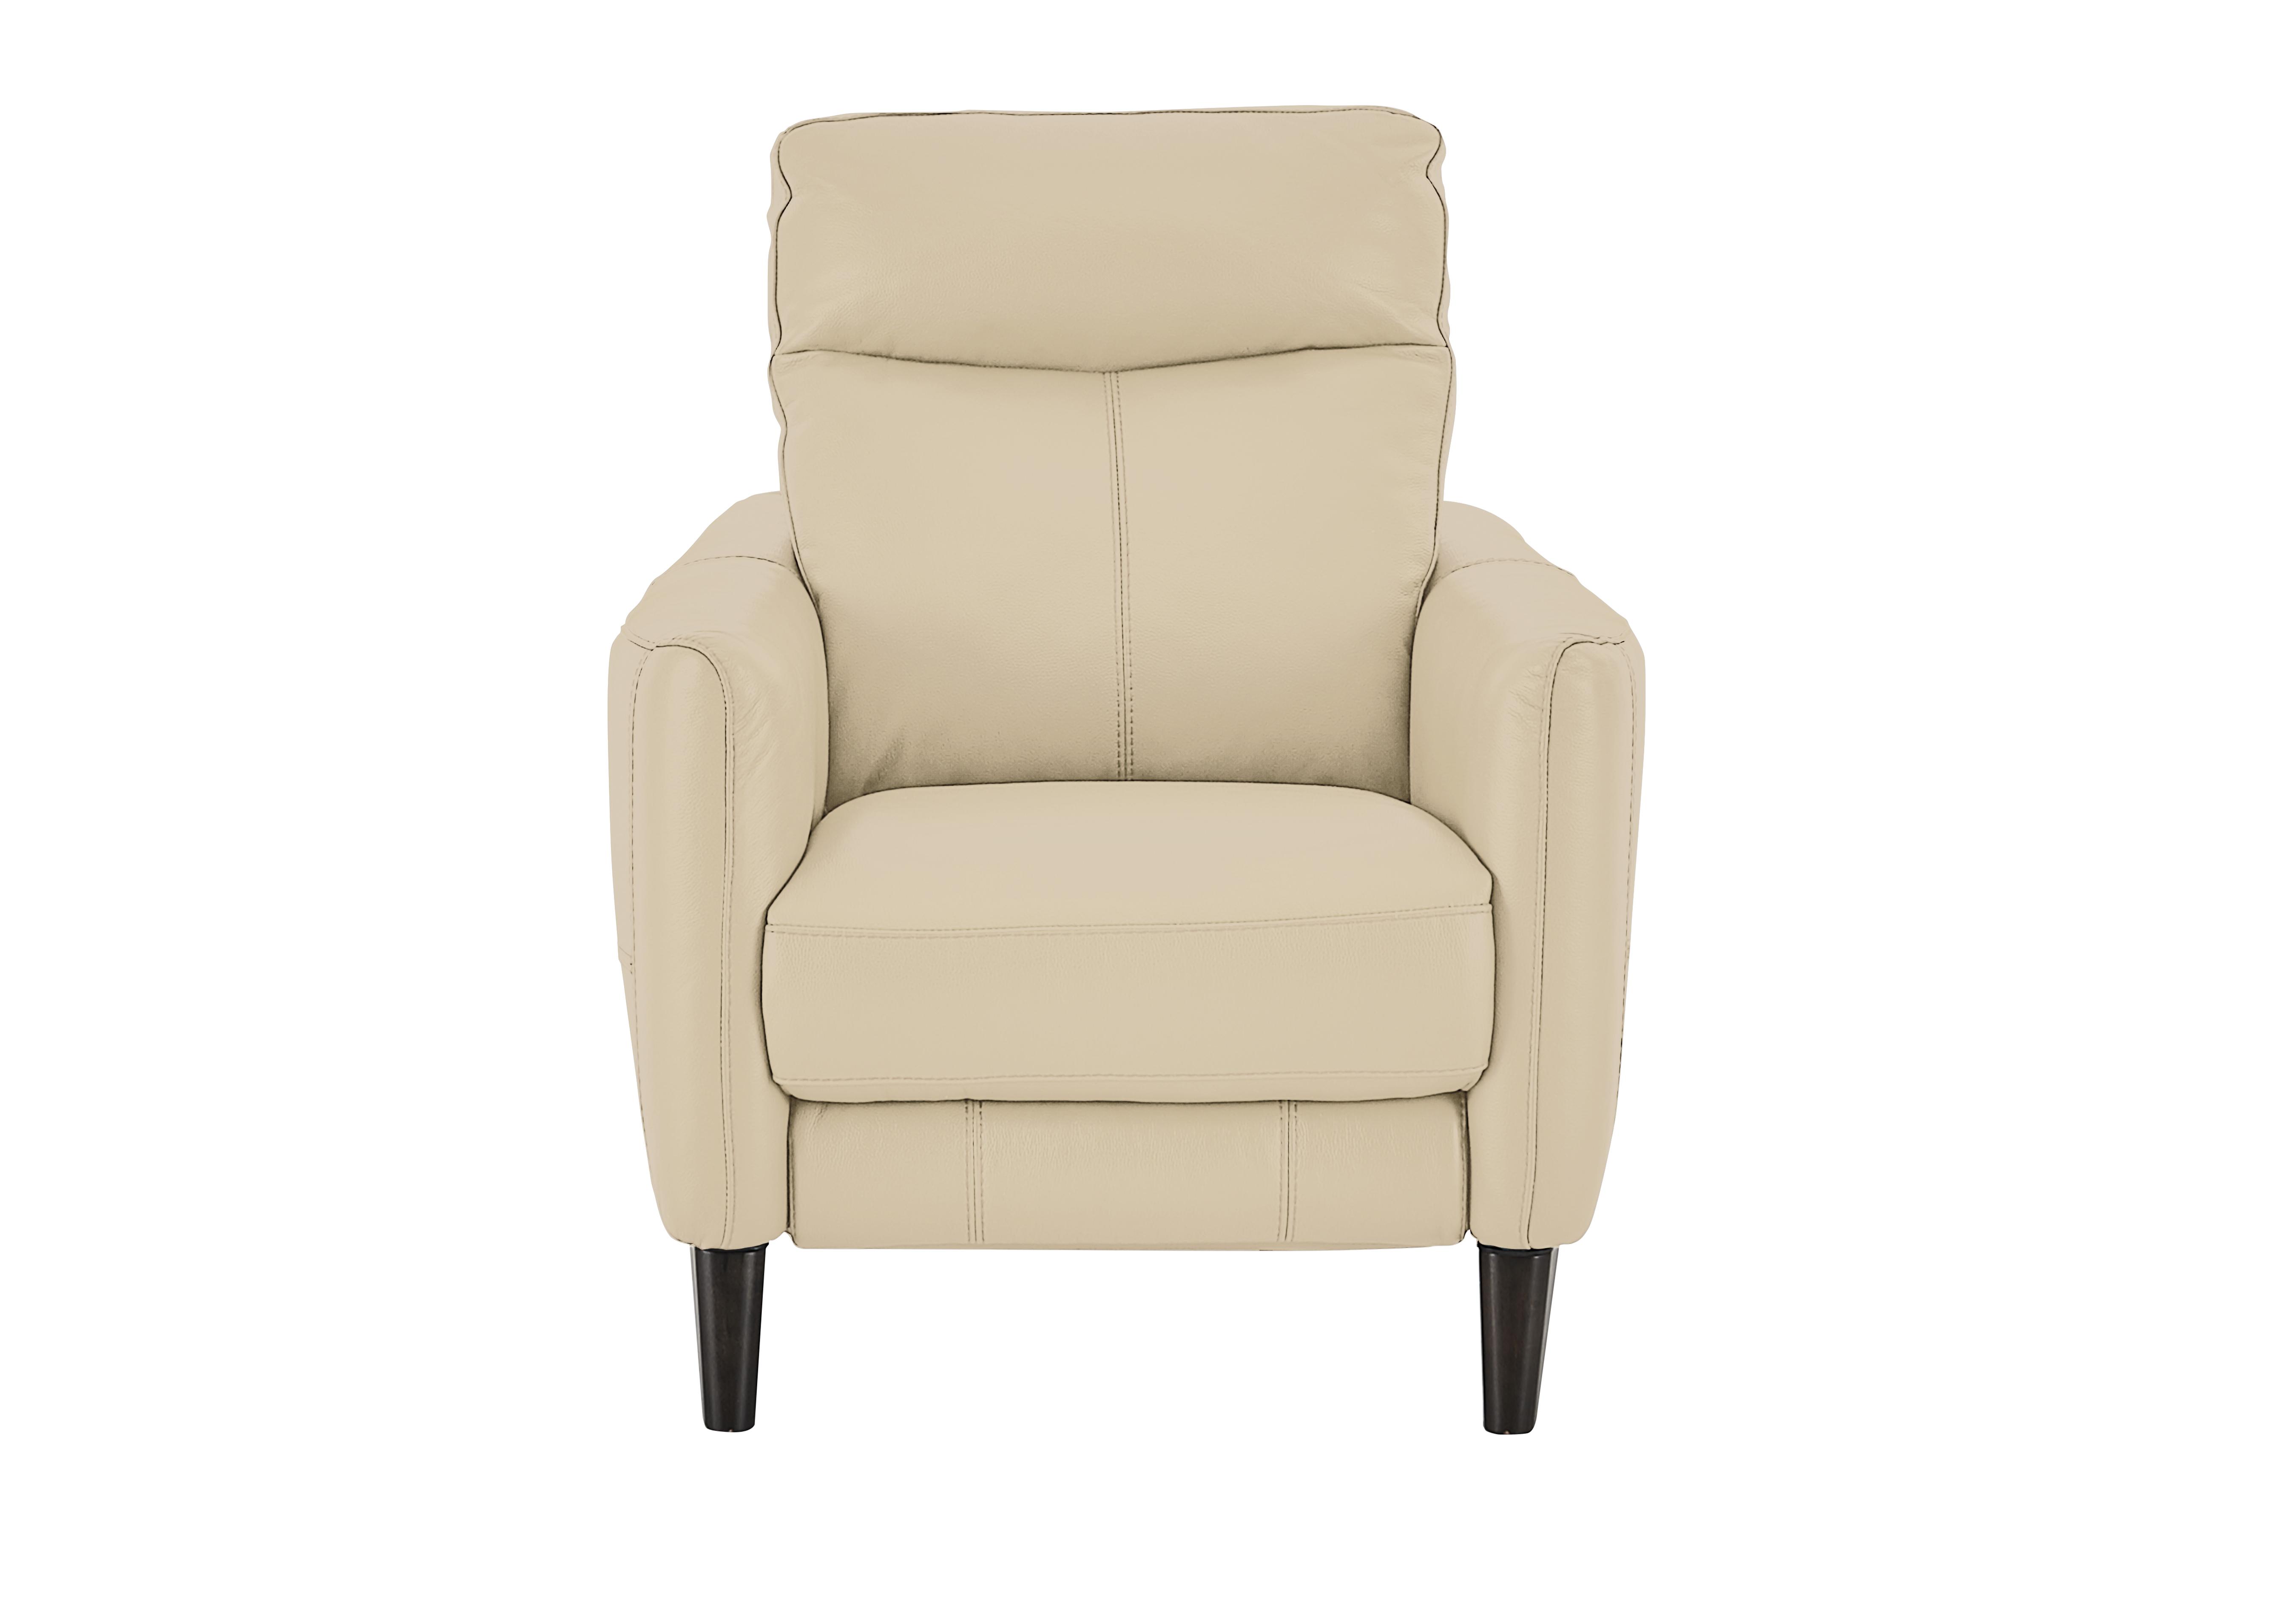 Compact Collection Petit Leather Recliner Armchair in Bv-862c Bisque on Furniture Village